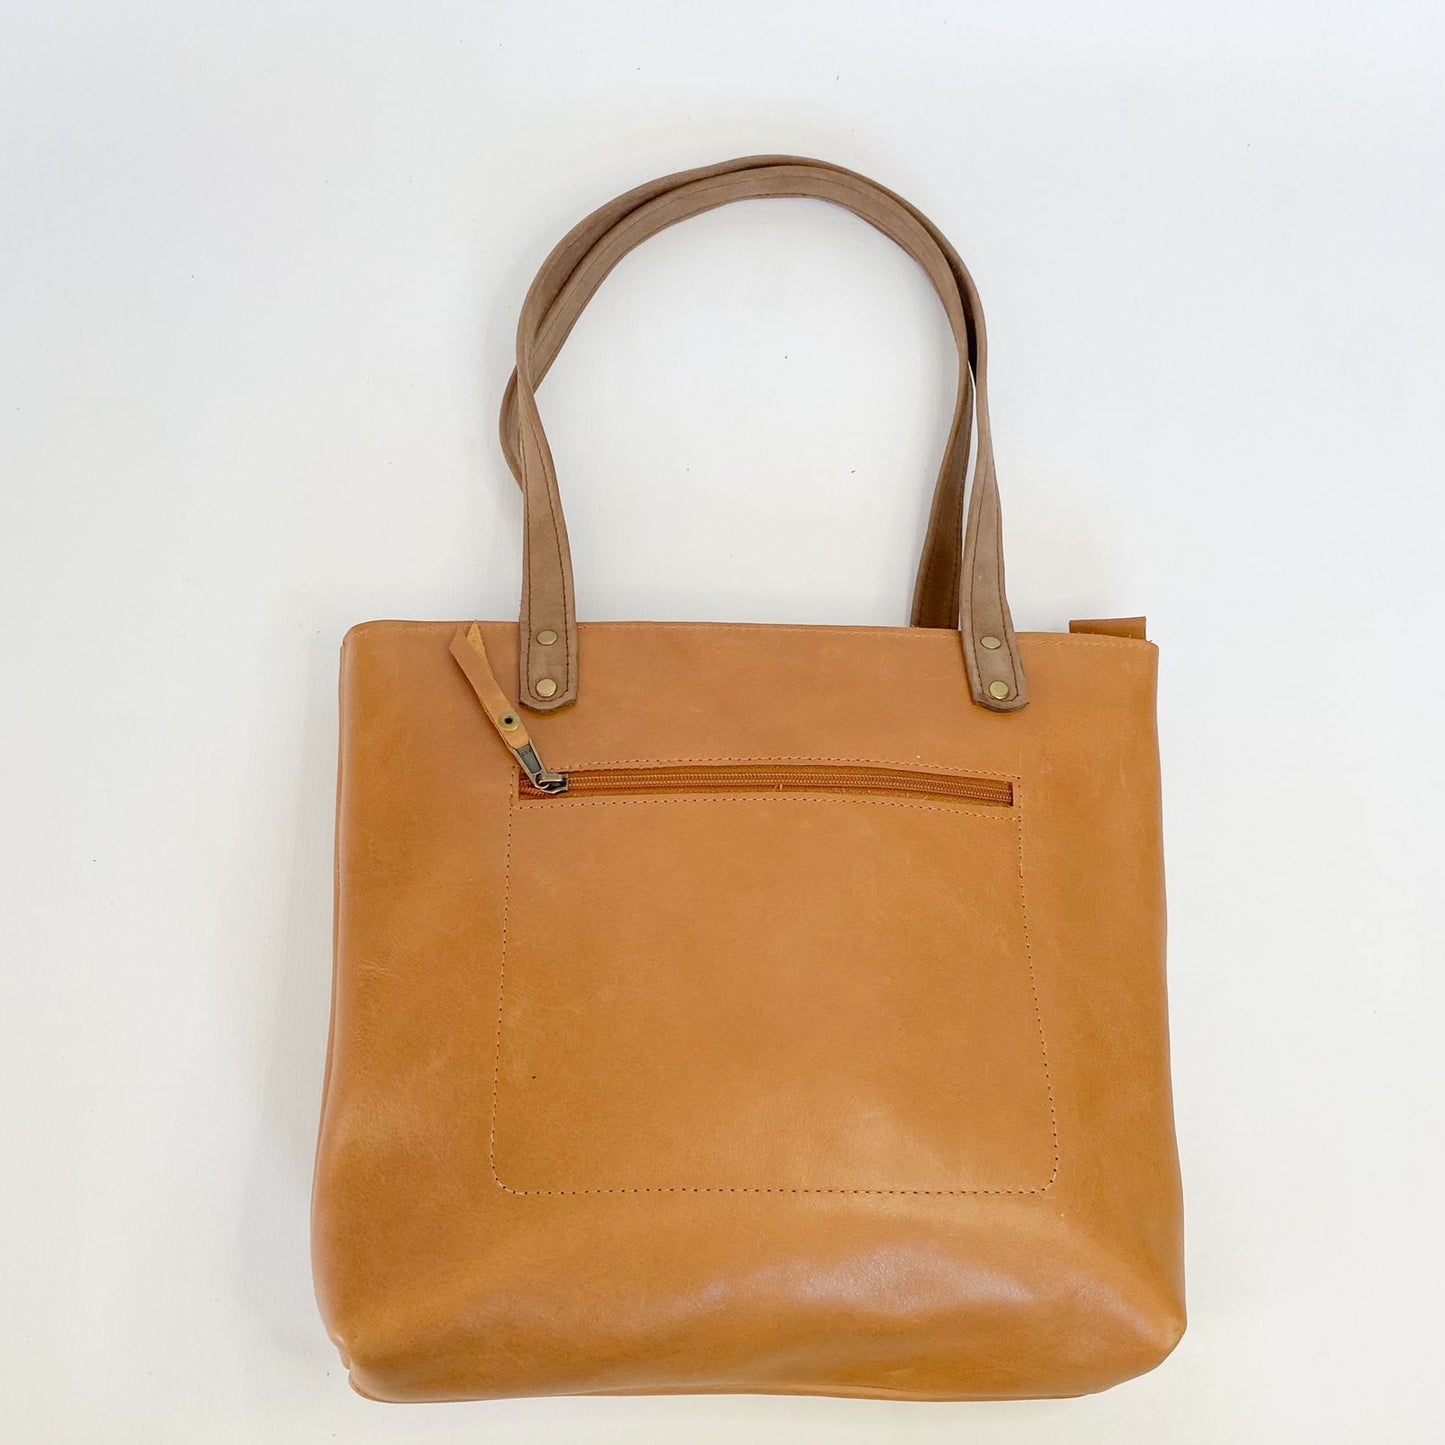 Gia leather tan tote with front pocket